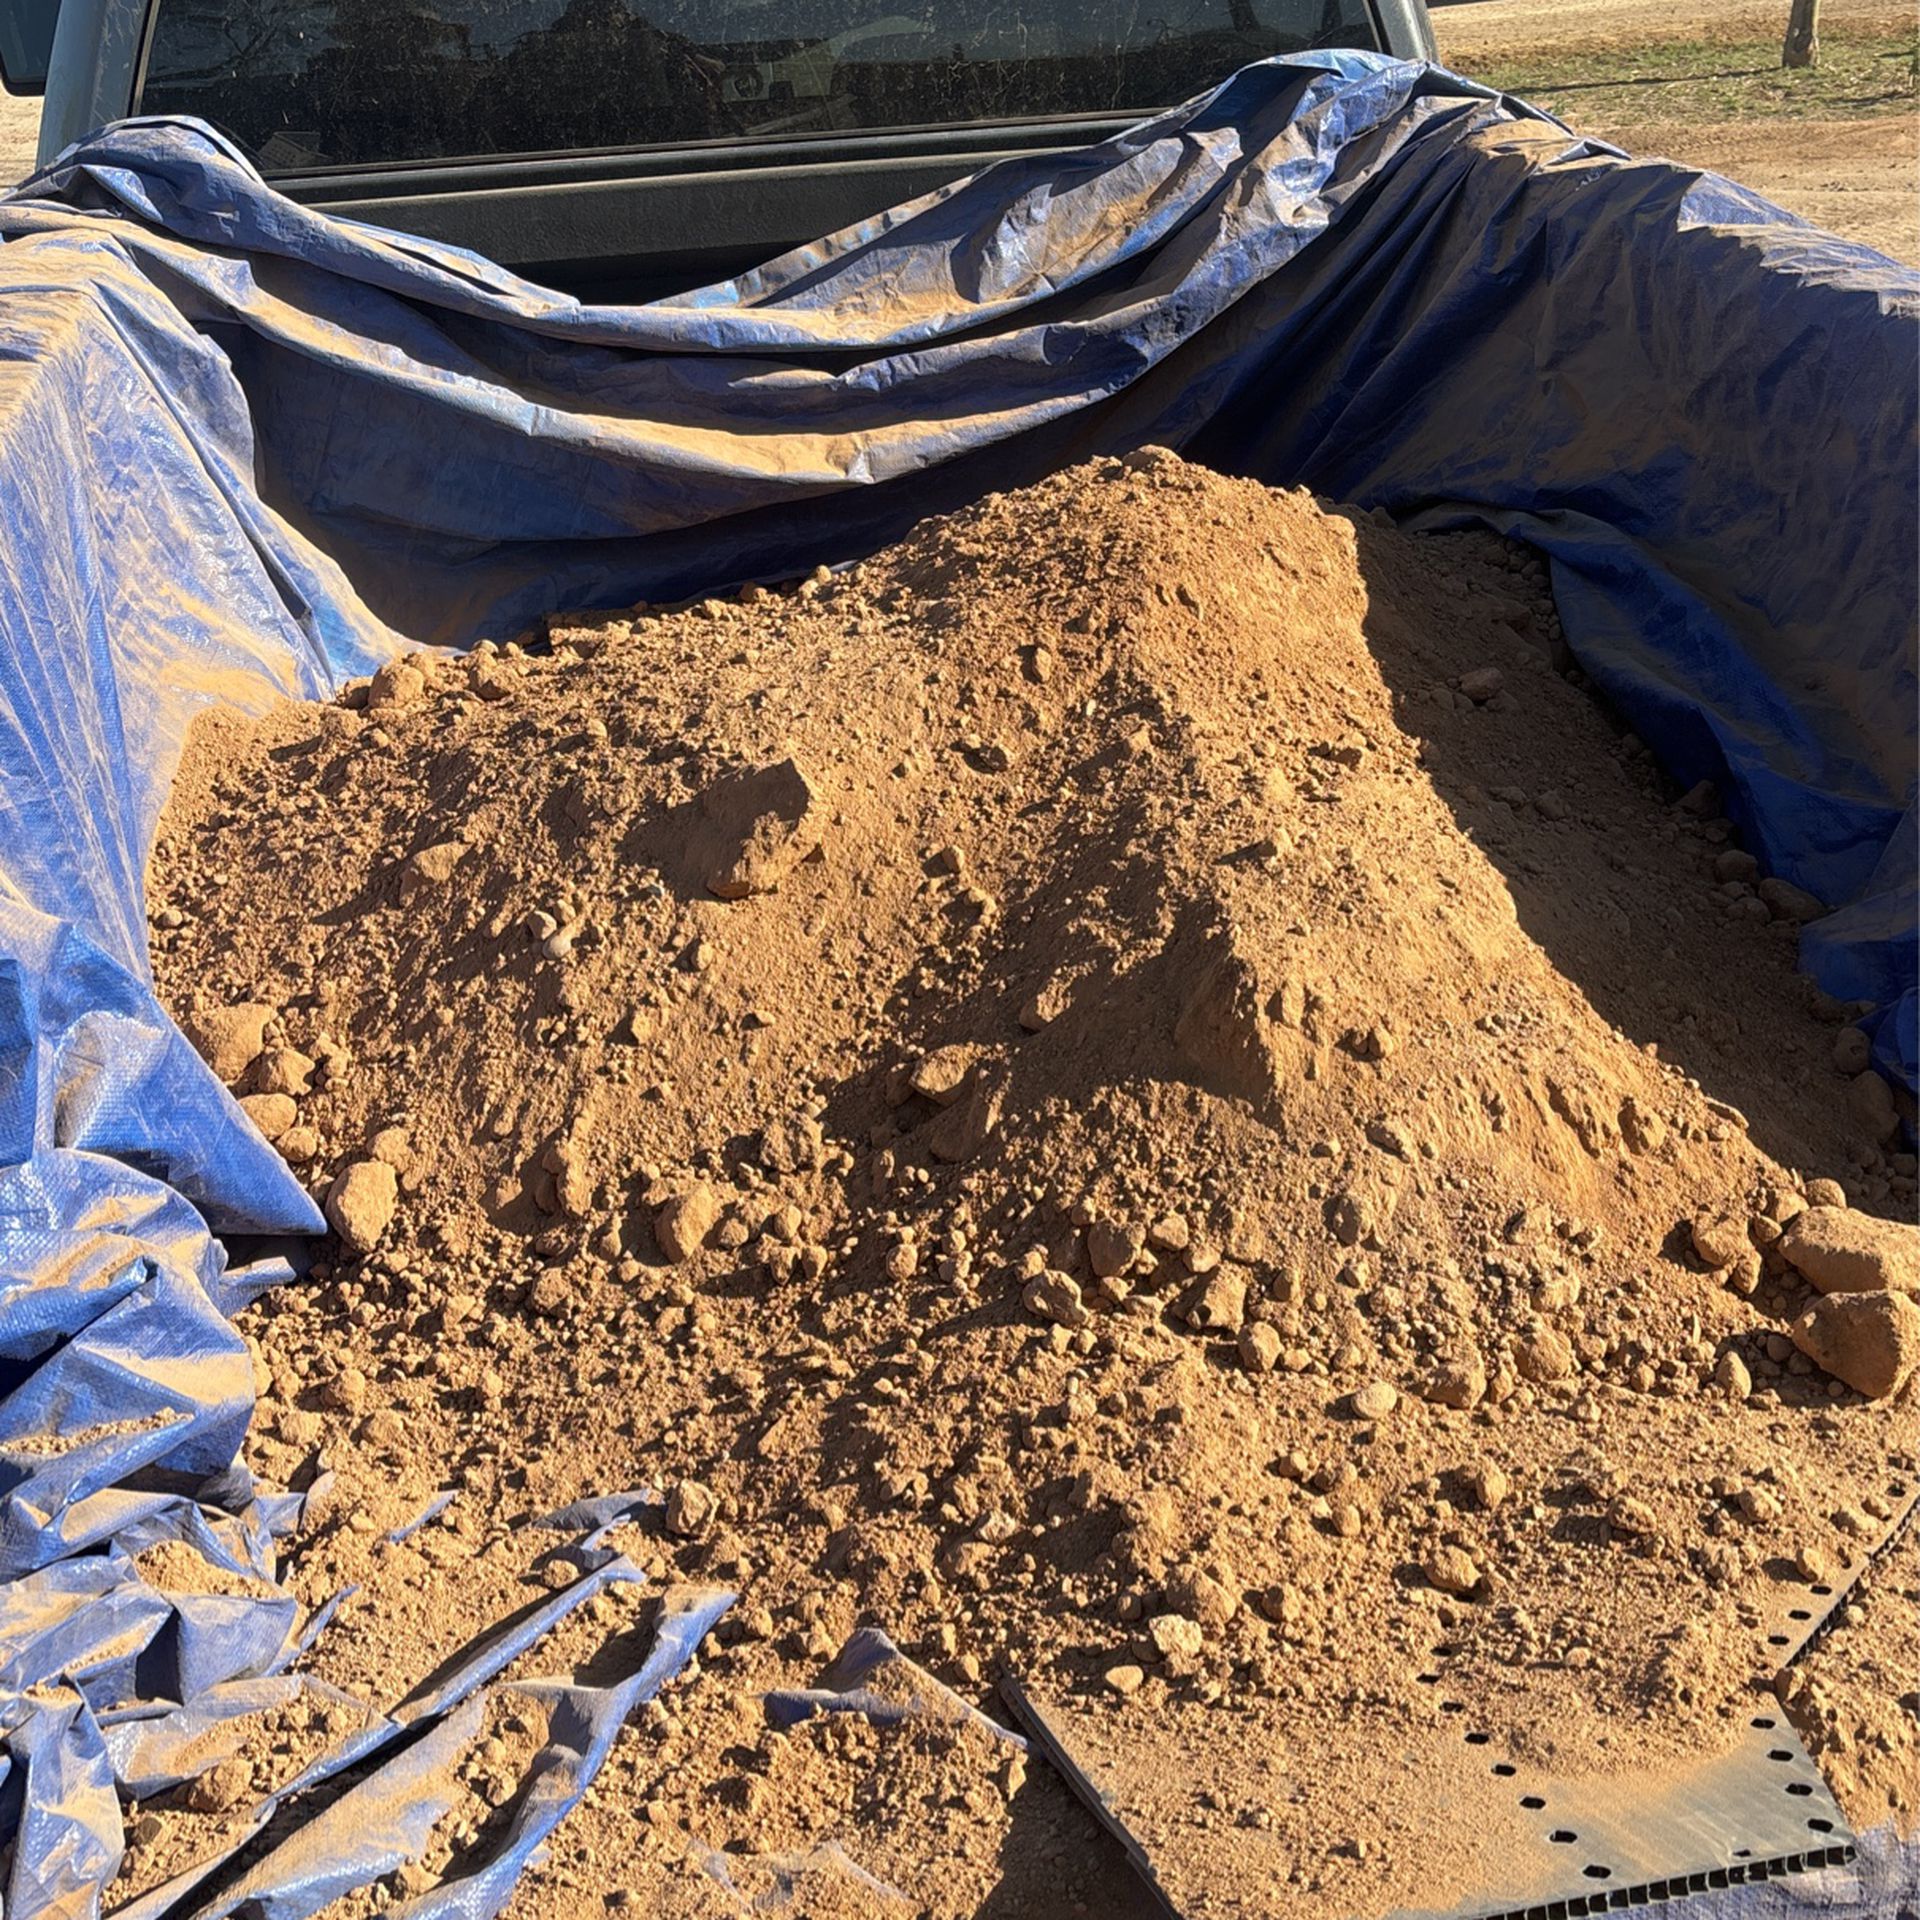 Need Clean Fill Dirt Delivered?  Let Me Know I Can Bring A Little Or Truck Loads Full. South Phx N Tempe Area  